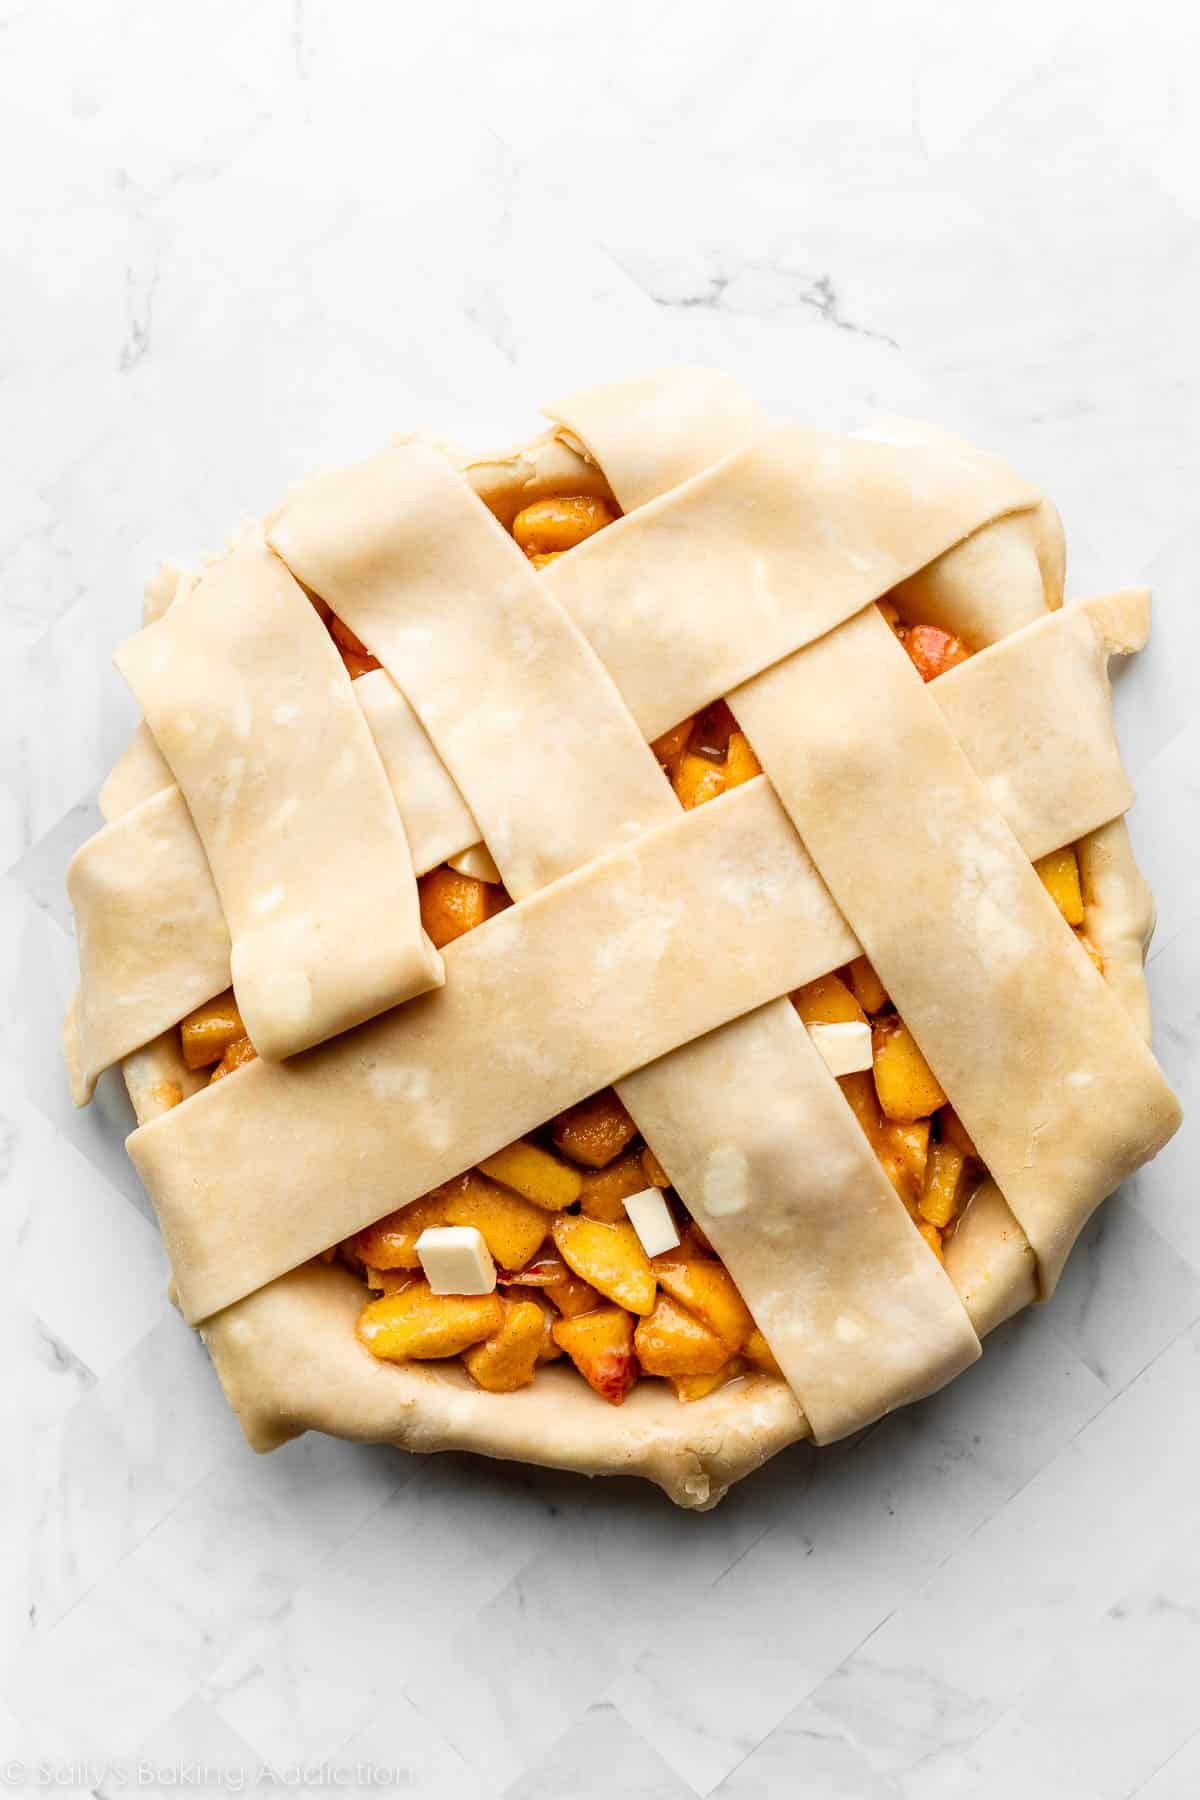 assembling lattice topping with thick pie dough strips.